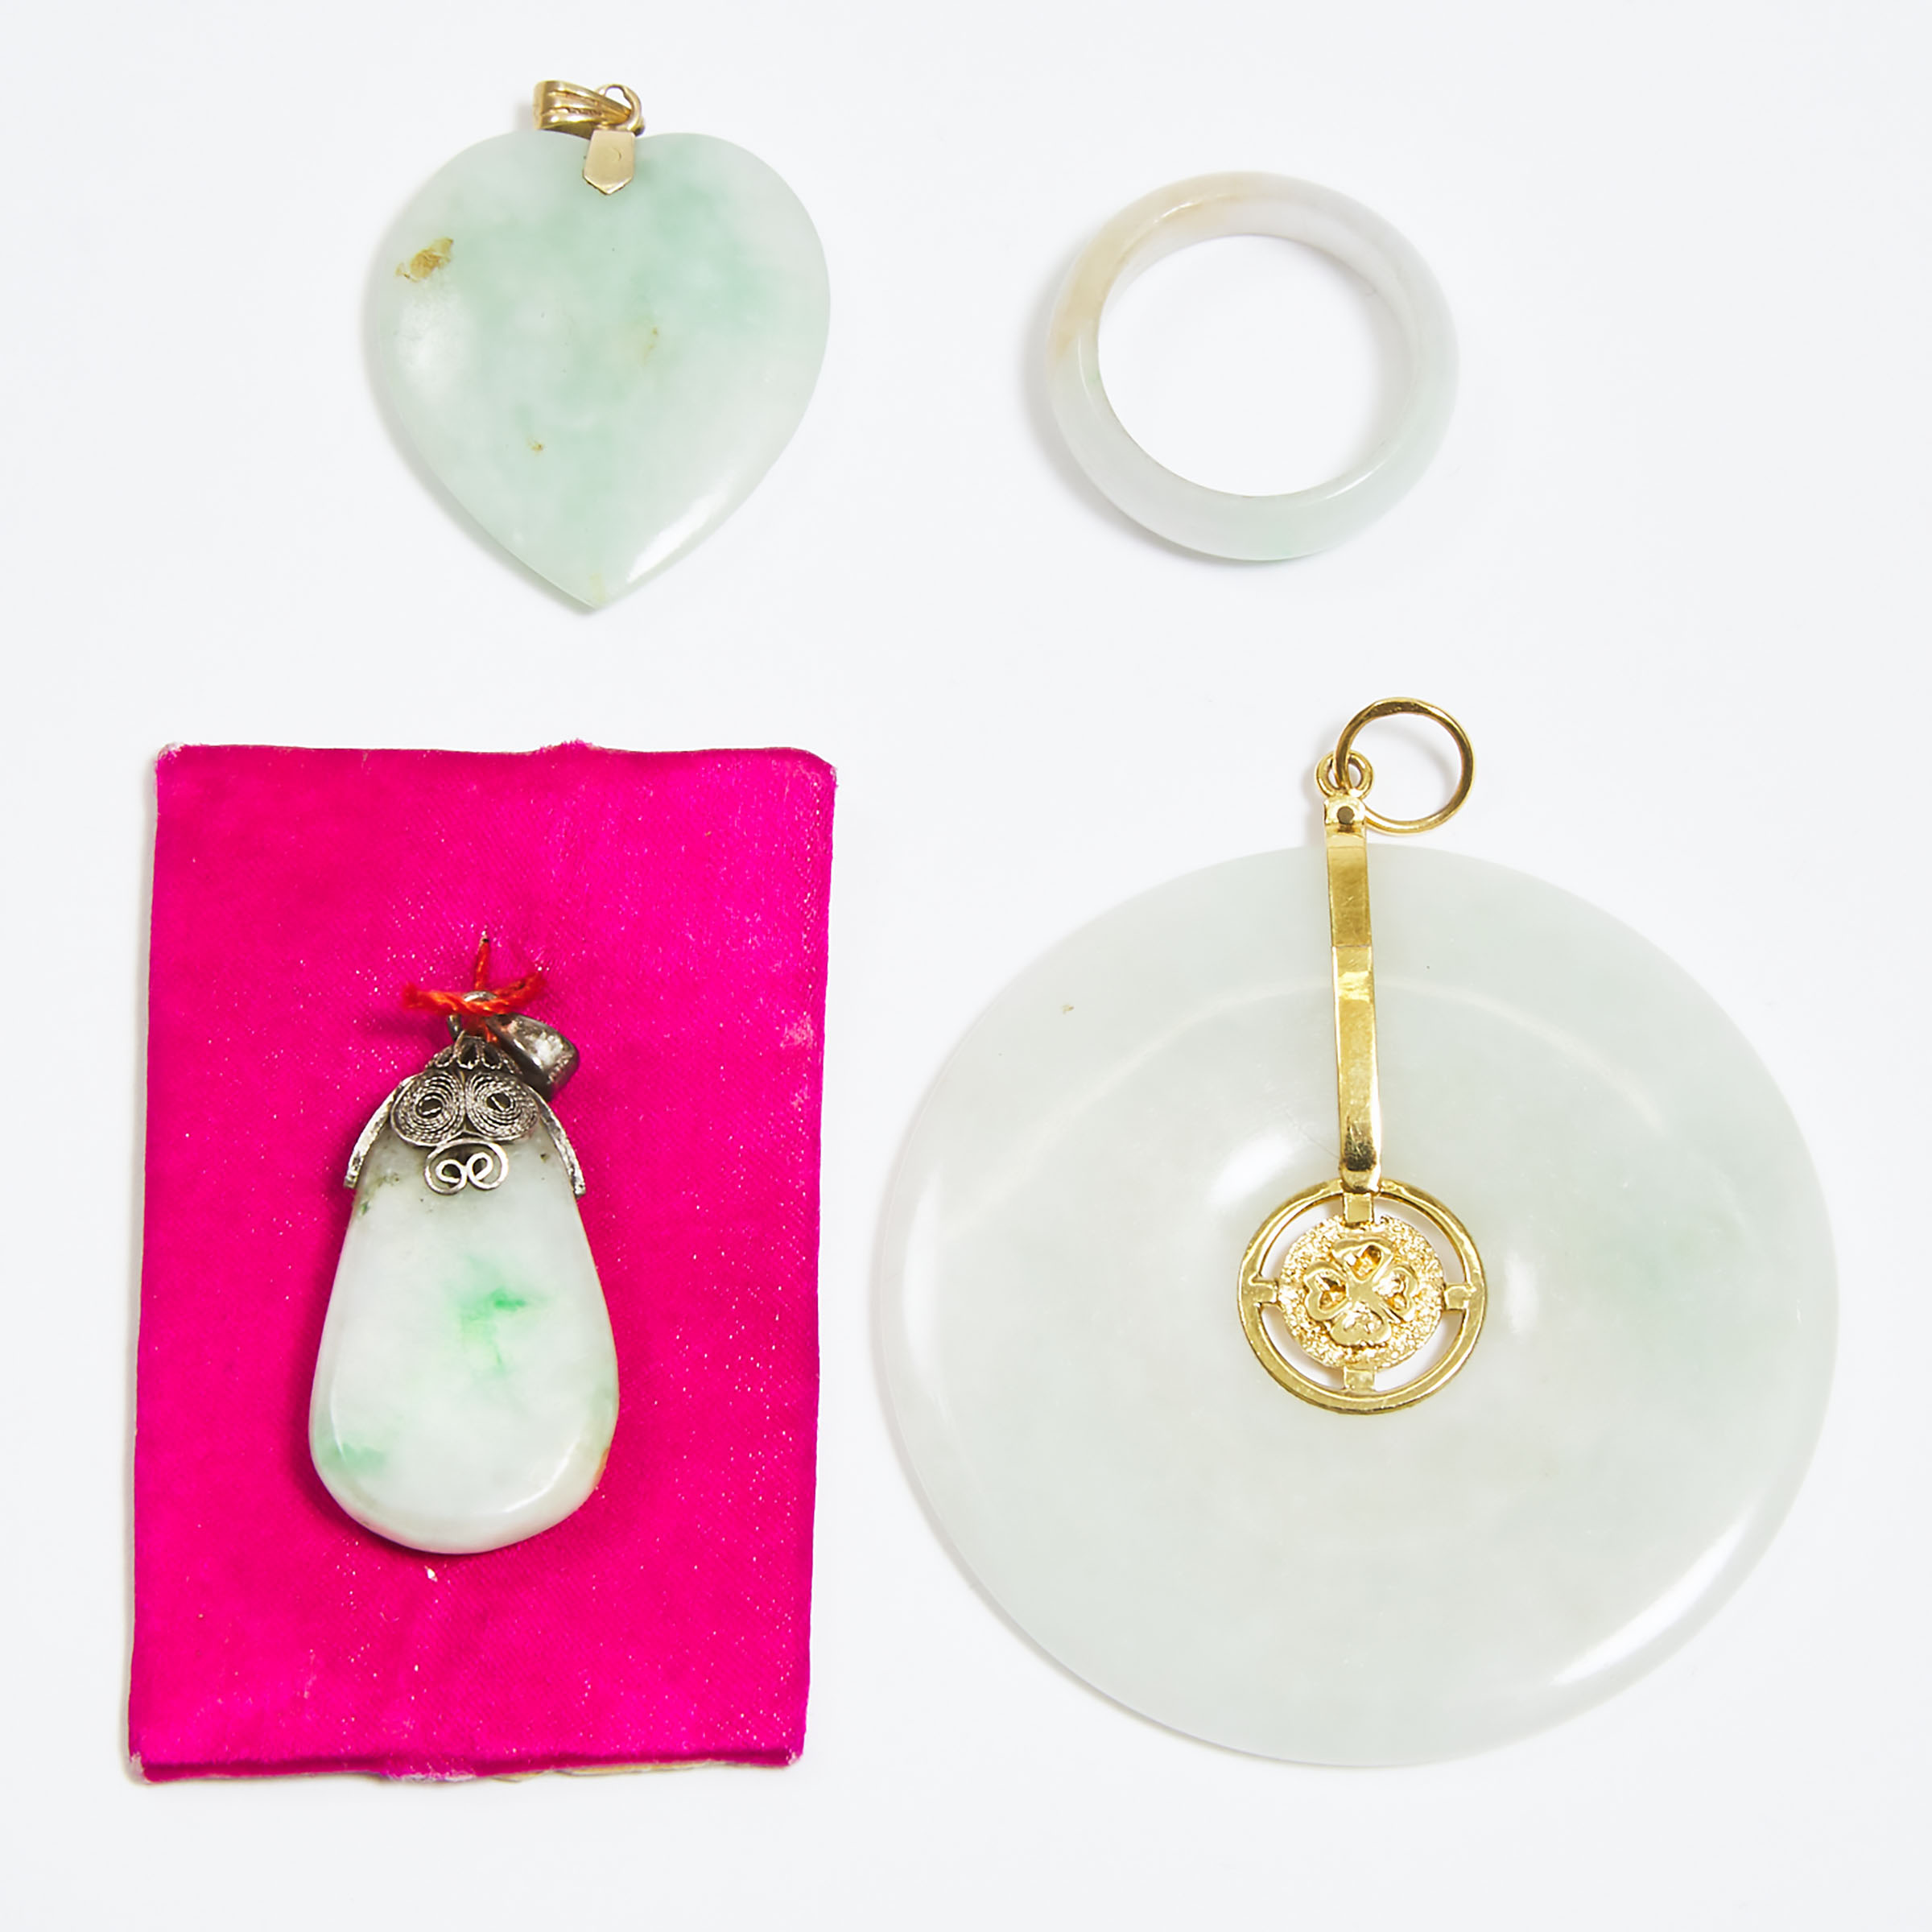 A Group of Four Jadeite Jewellery Pieces, Late Qing Dynasty